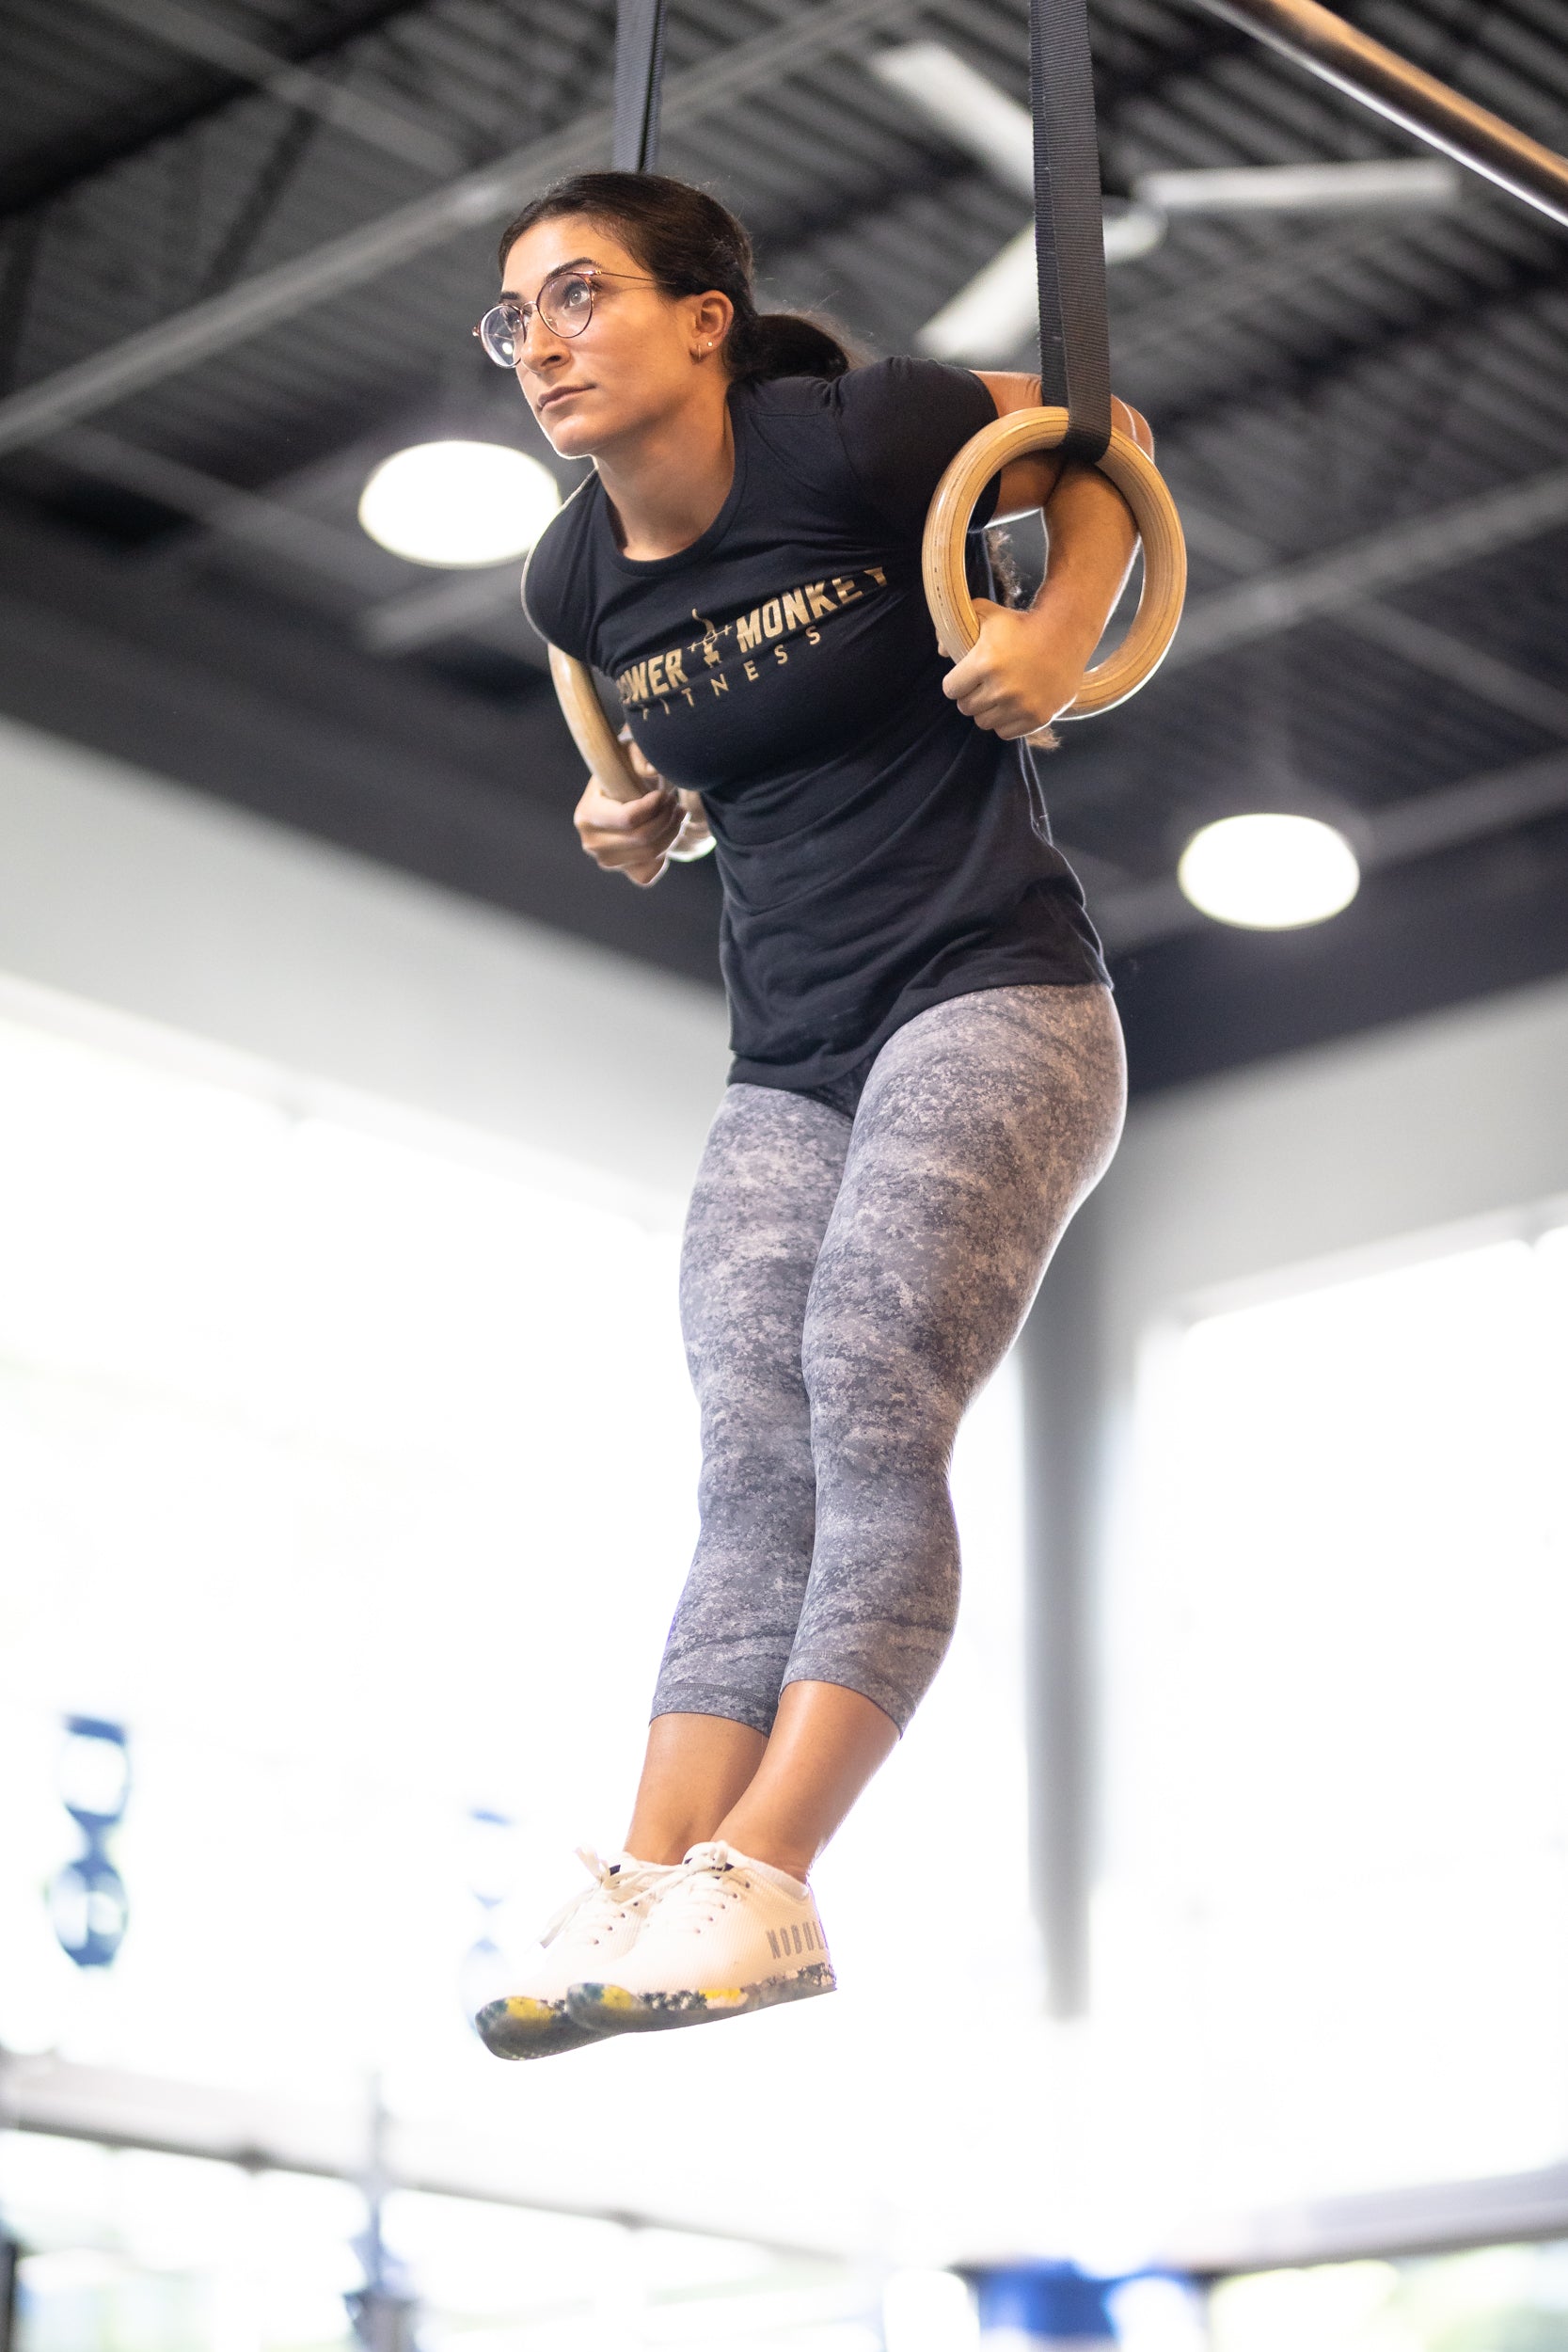 Image of a woman performing a kipping ring muscle up using the power monkey training app